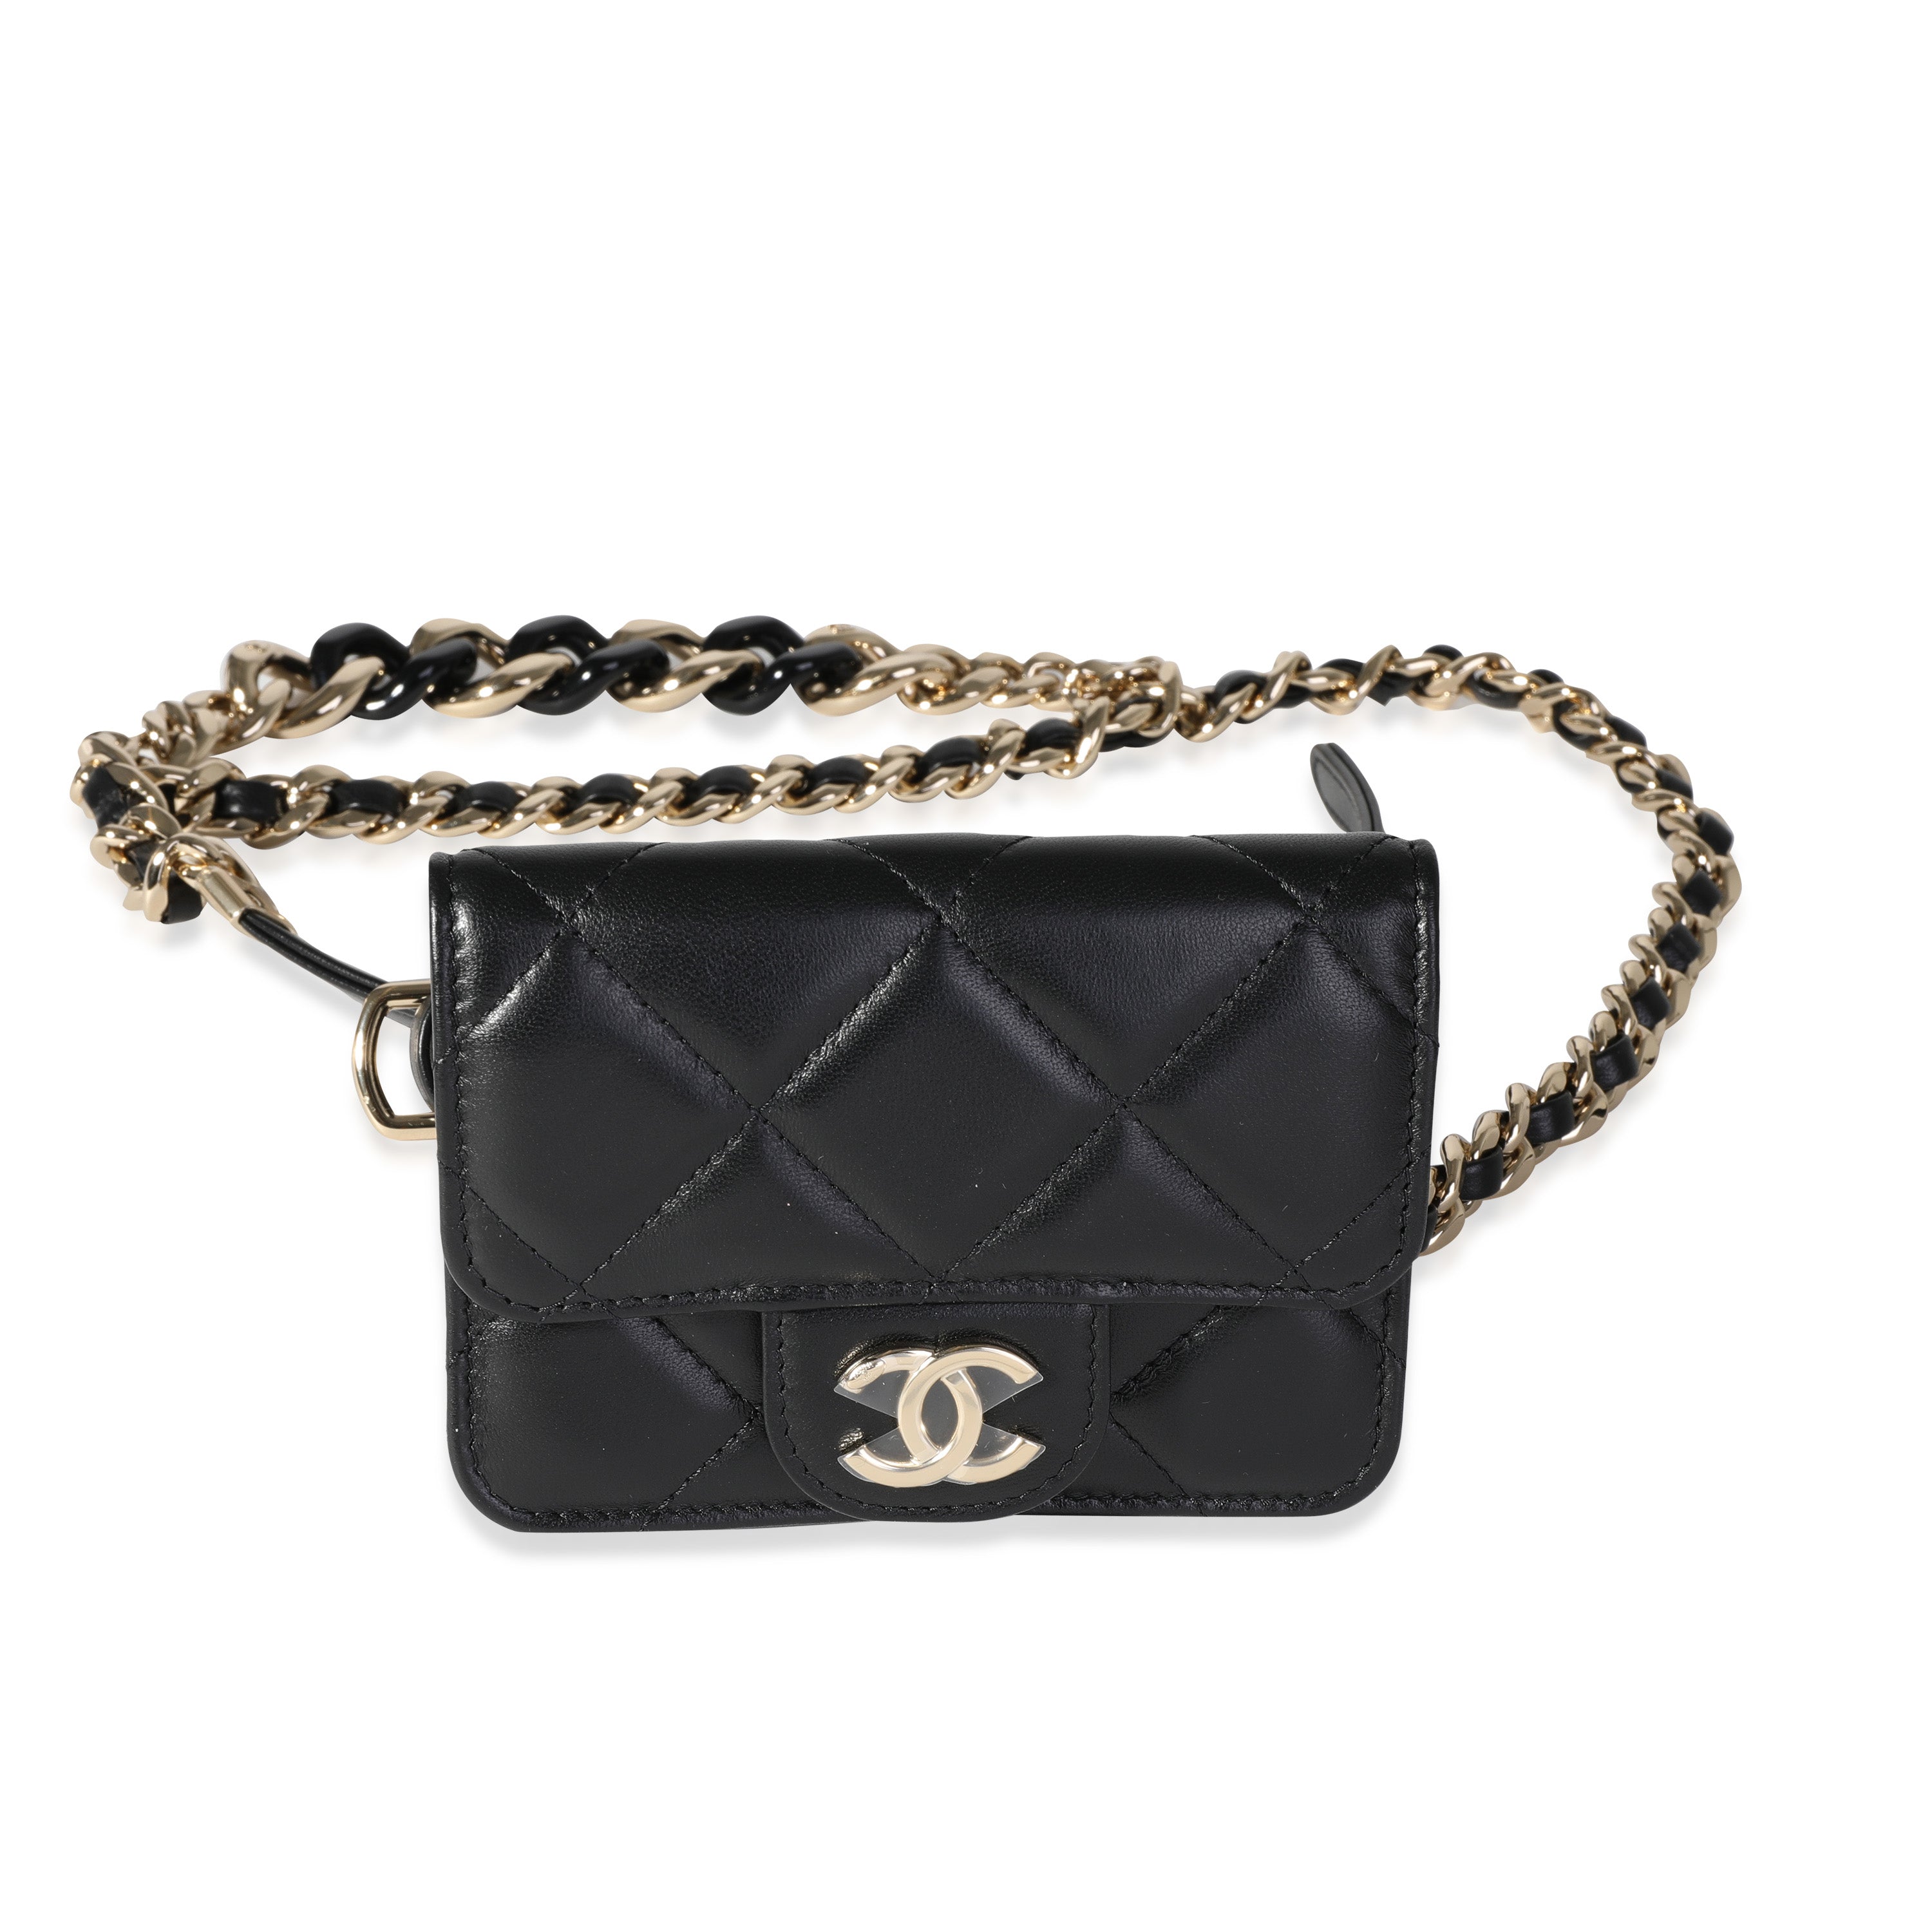 Bags, Acrylic Bag Chain For Chanel Or Louis Vuitton Bags